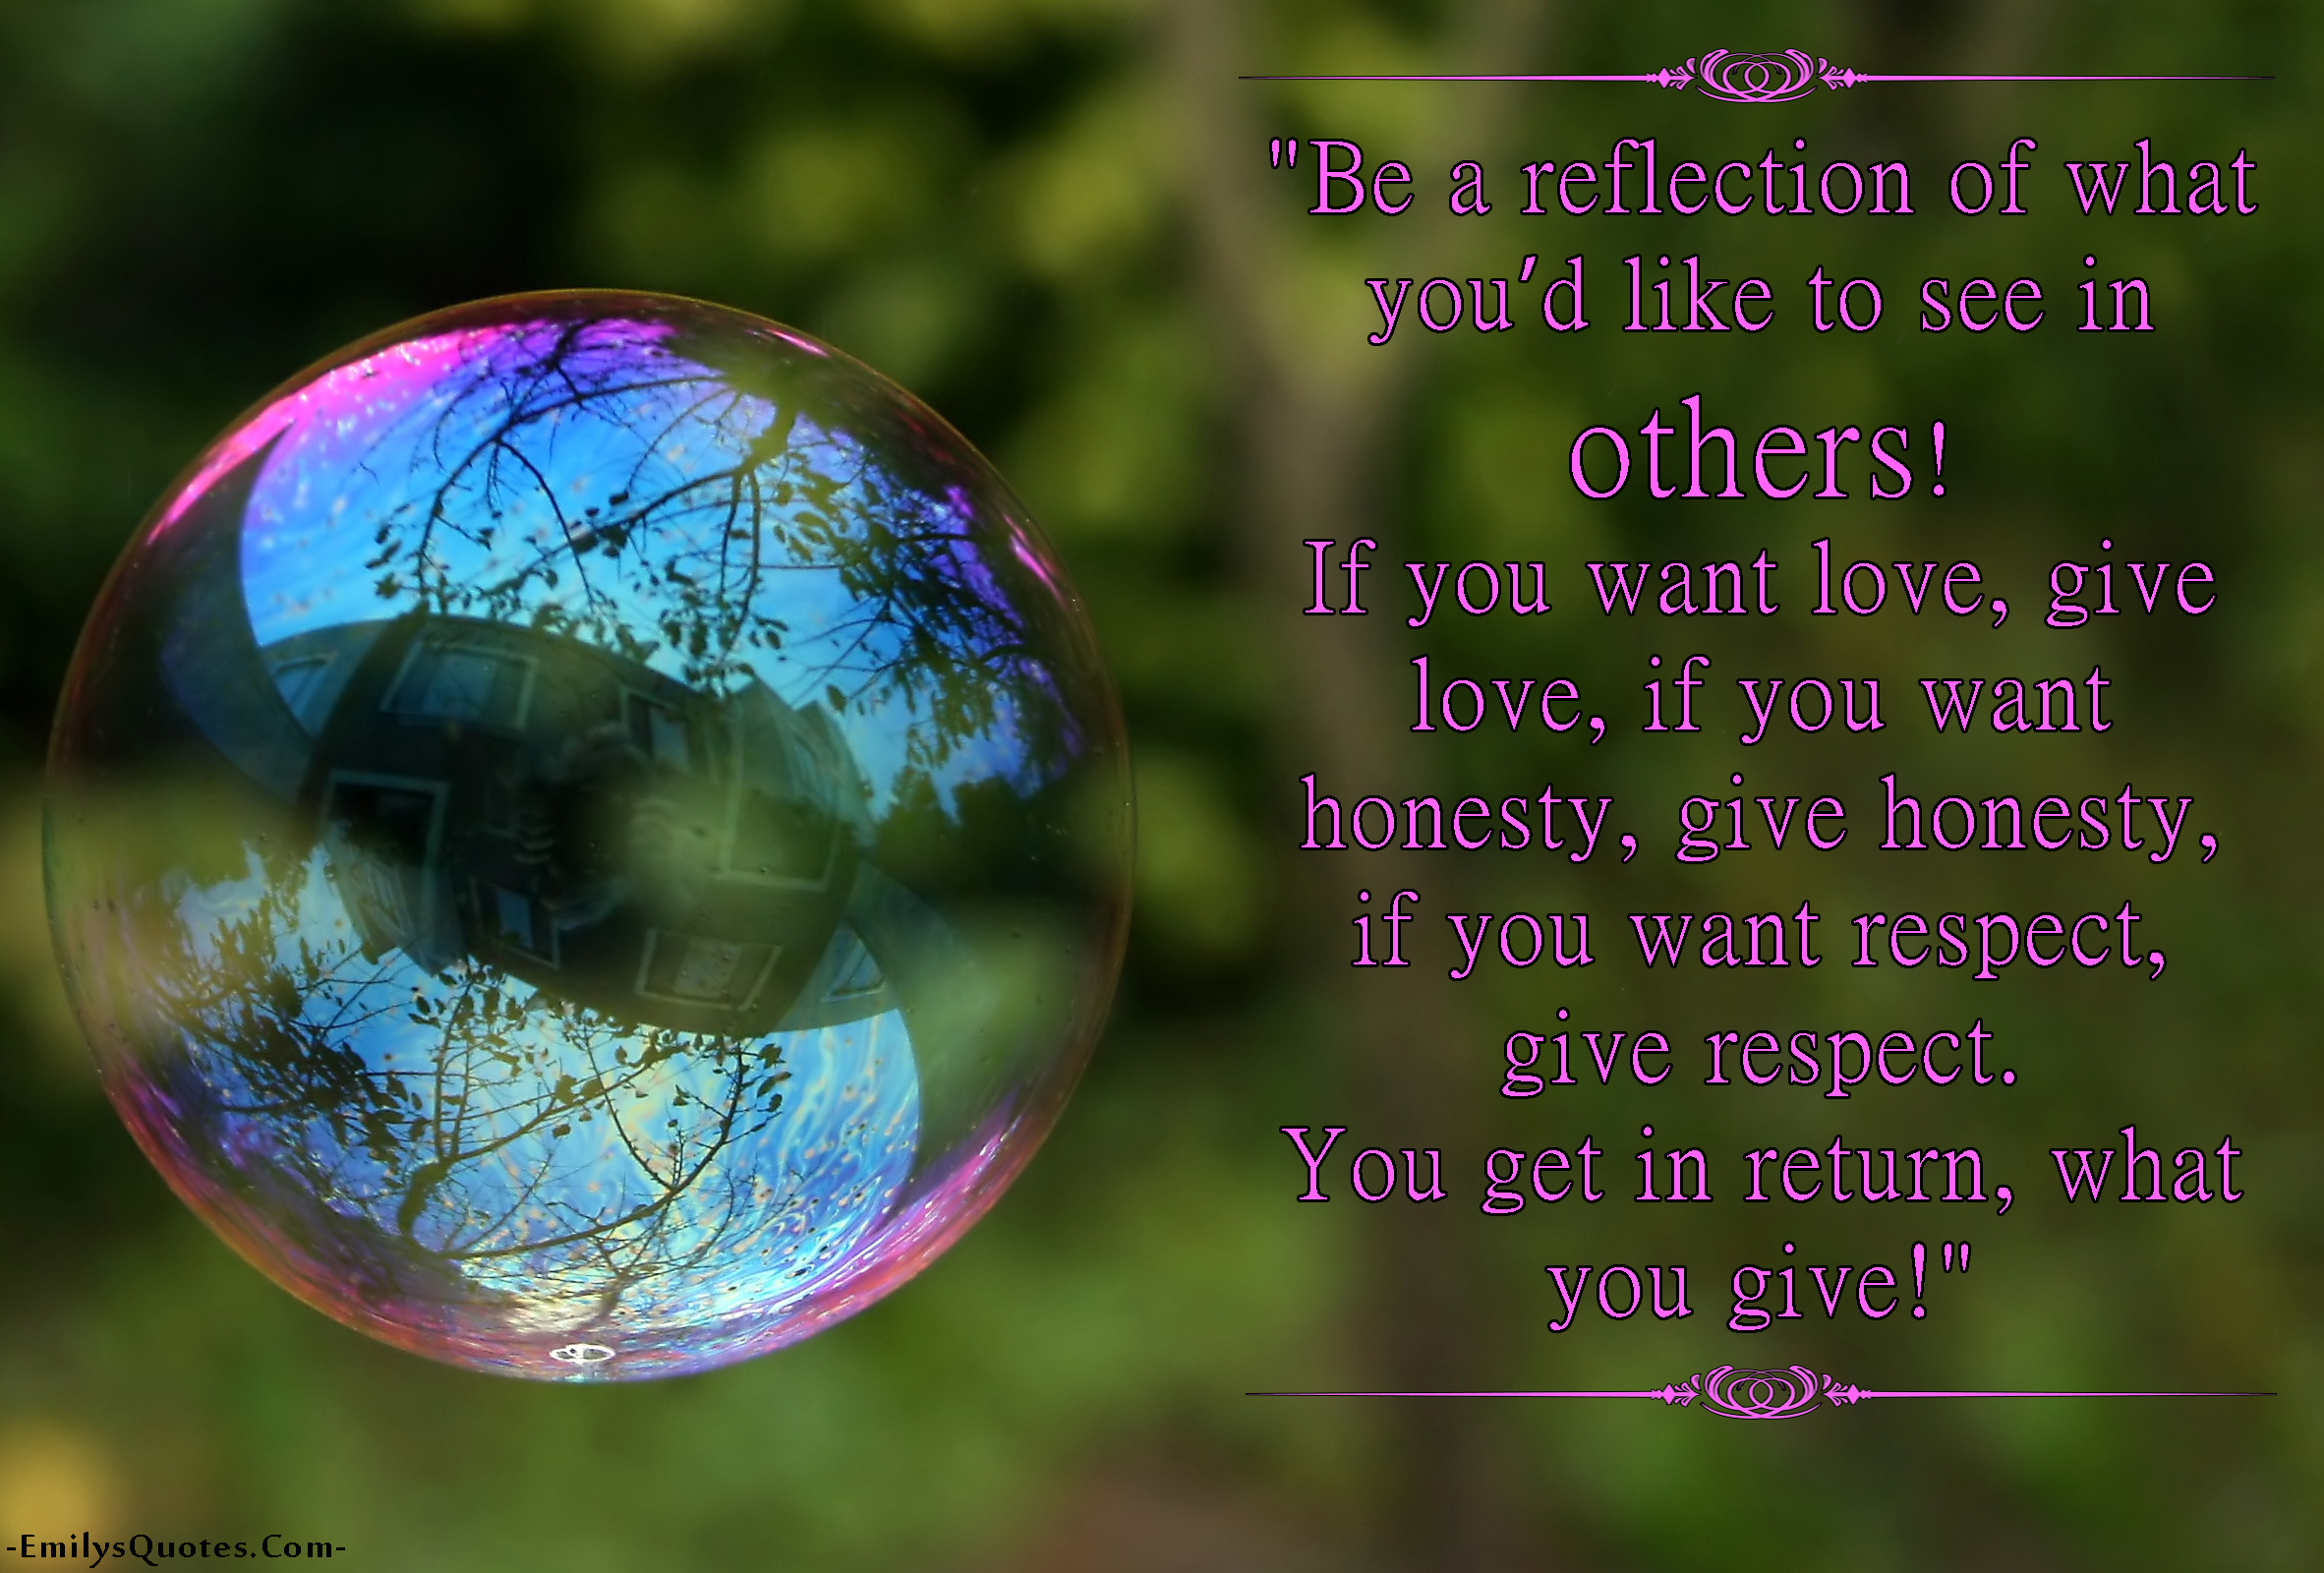 Be a reflection of what you’d like to see in others! If you want love, give love, if you want honesty, give honesty, if you want respect, give respect. You get in return, what you give!